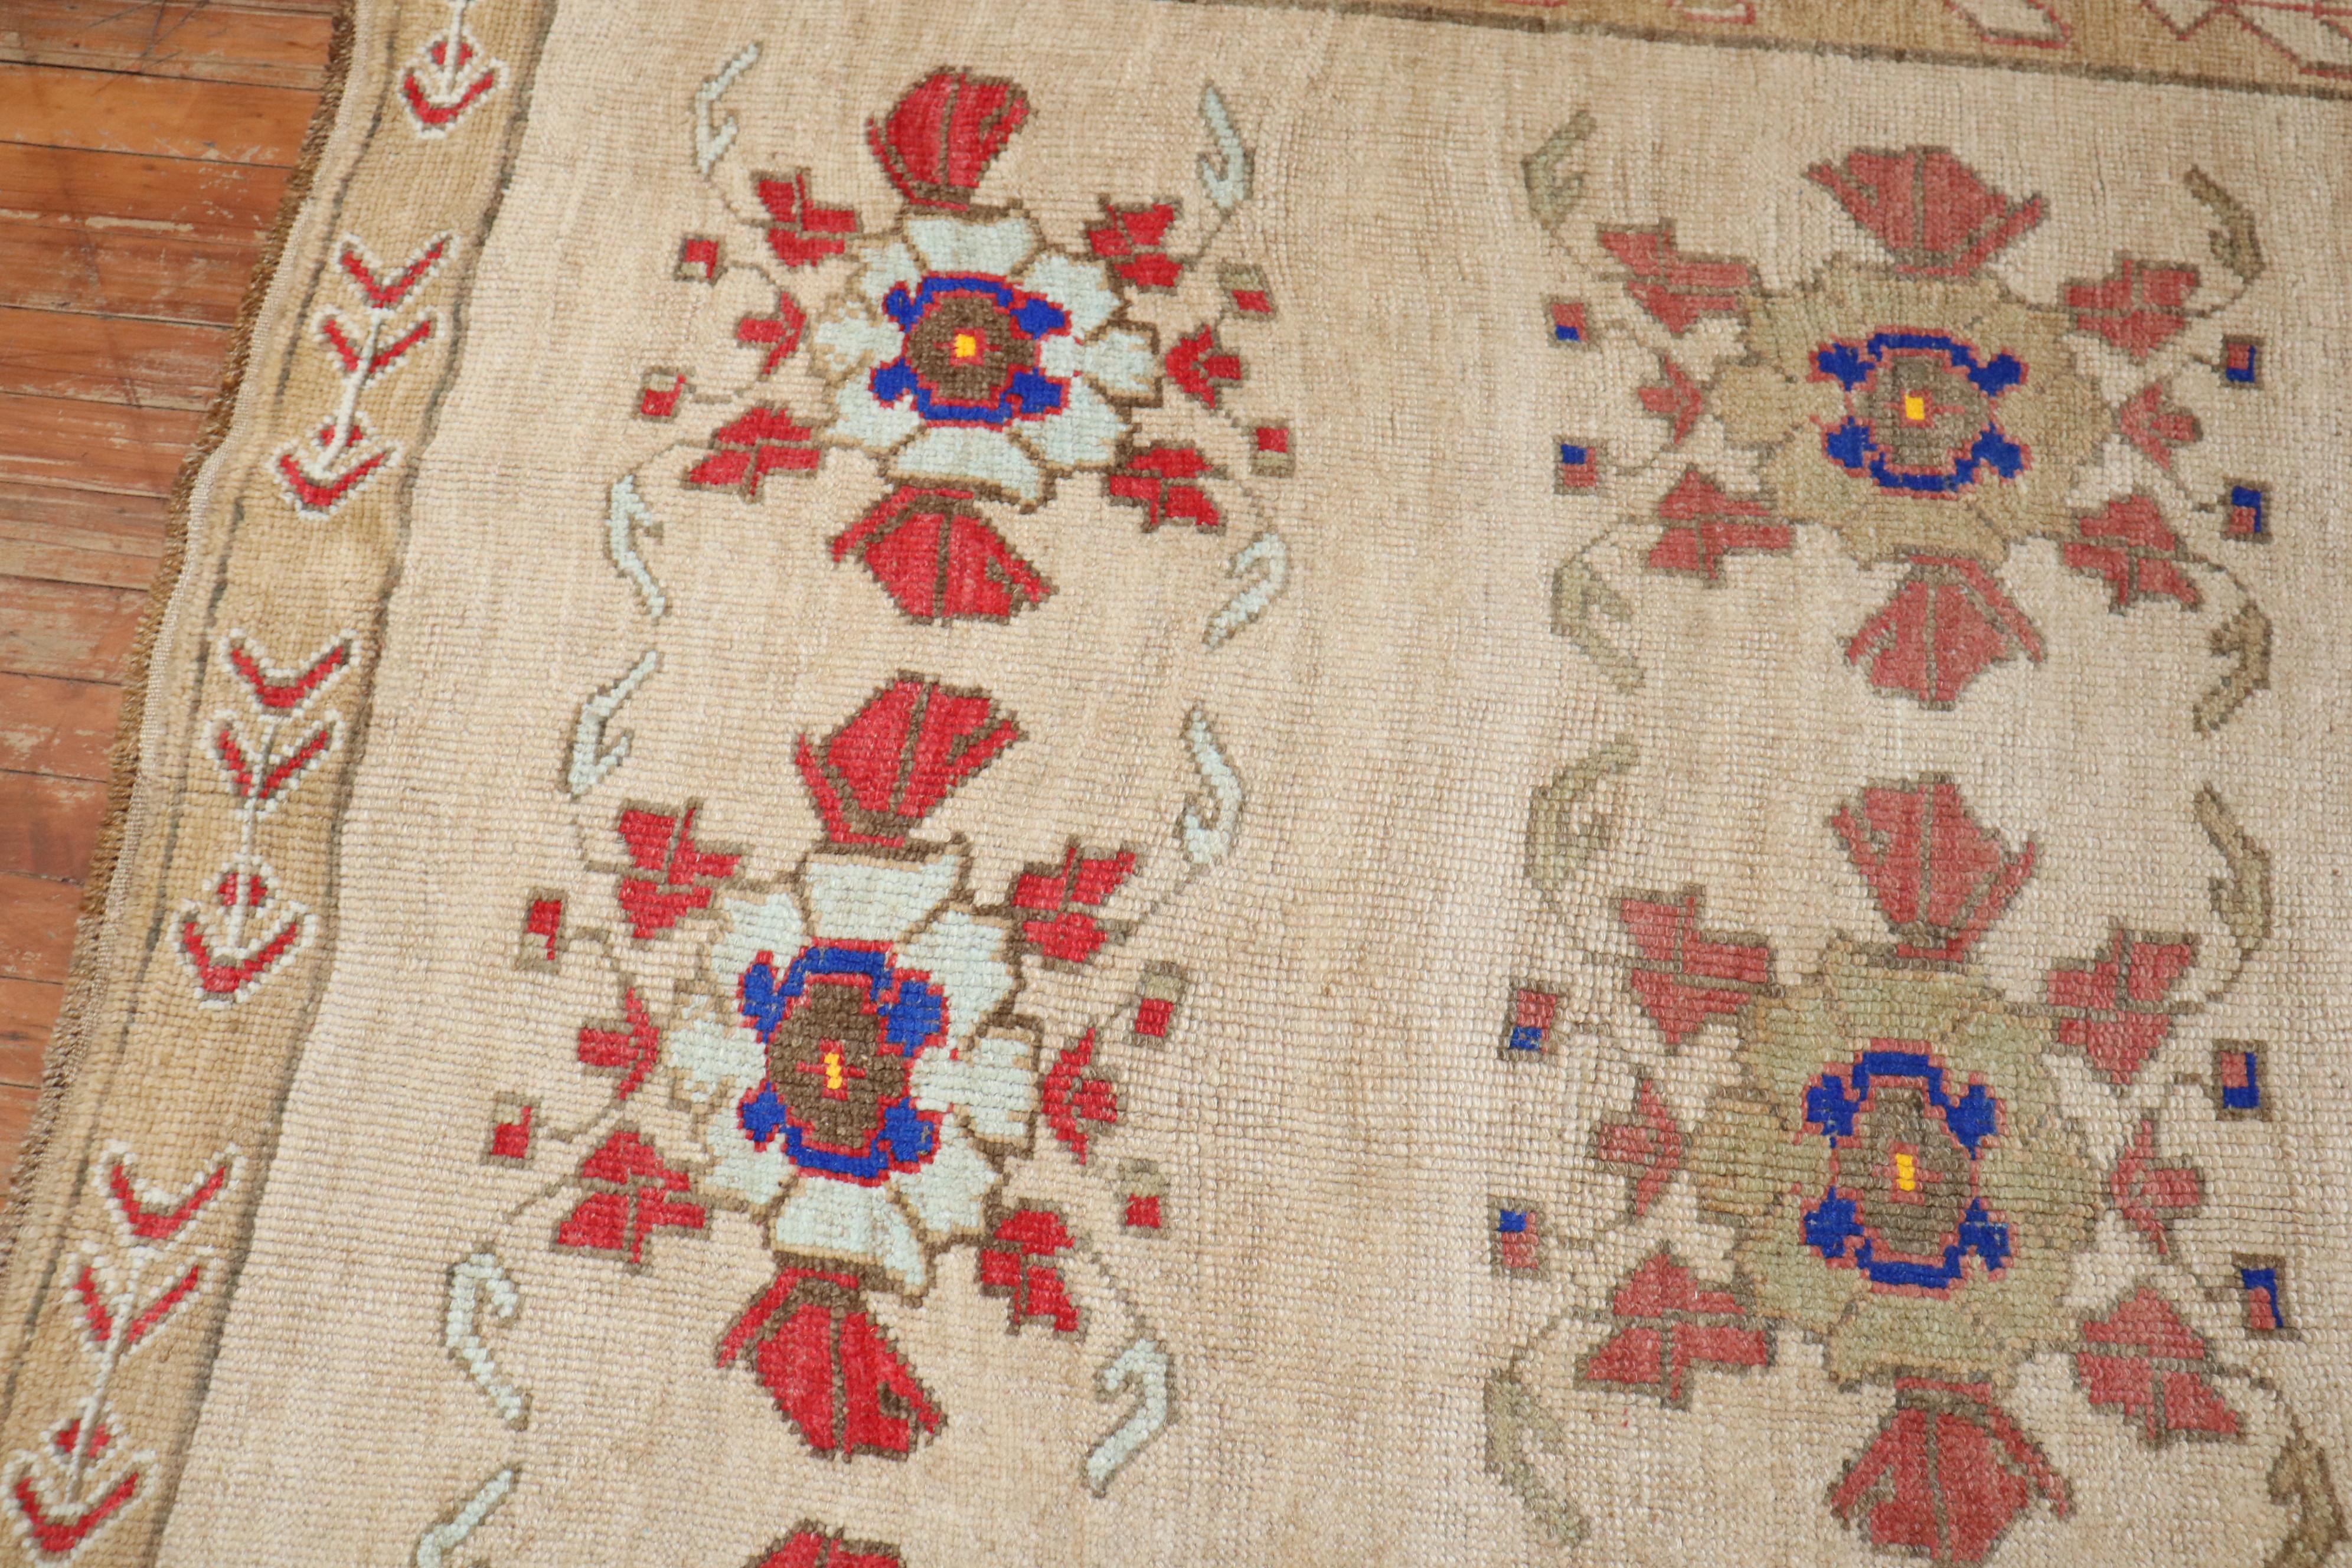 3rd quarter of the 20th Century Turkish Kars rug with an all over floral design on an ivory field

Measures: 5'7'' x 8'1'' 